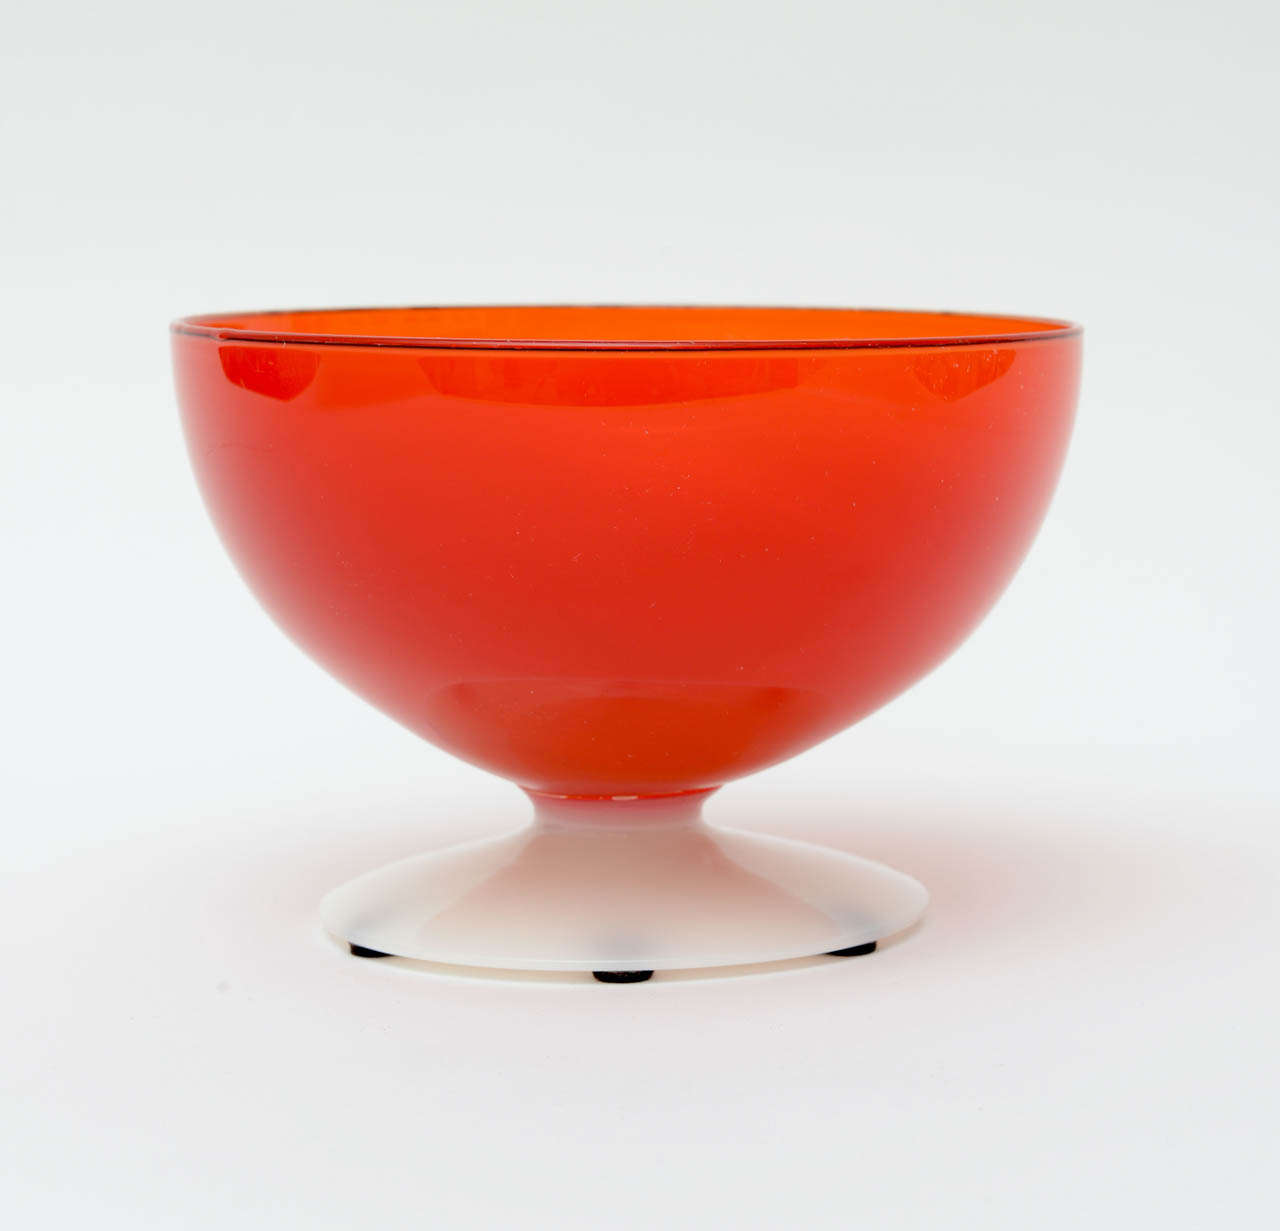 The rich red with the white opaque base glass bowl is dynamic and perfect for serving. It is American glass. It is dynamic shape and color on a table...
Also perfect for serving!!!

NOTE: THIS WILL BE ON THE SATURDAY SALE FOR 1 WEEK ONLY THRU MAY